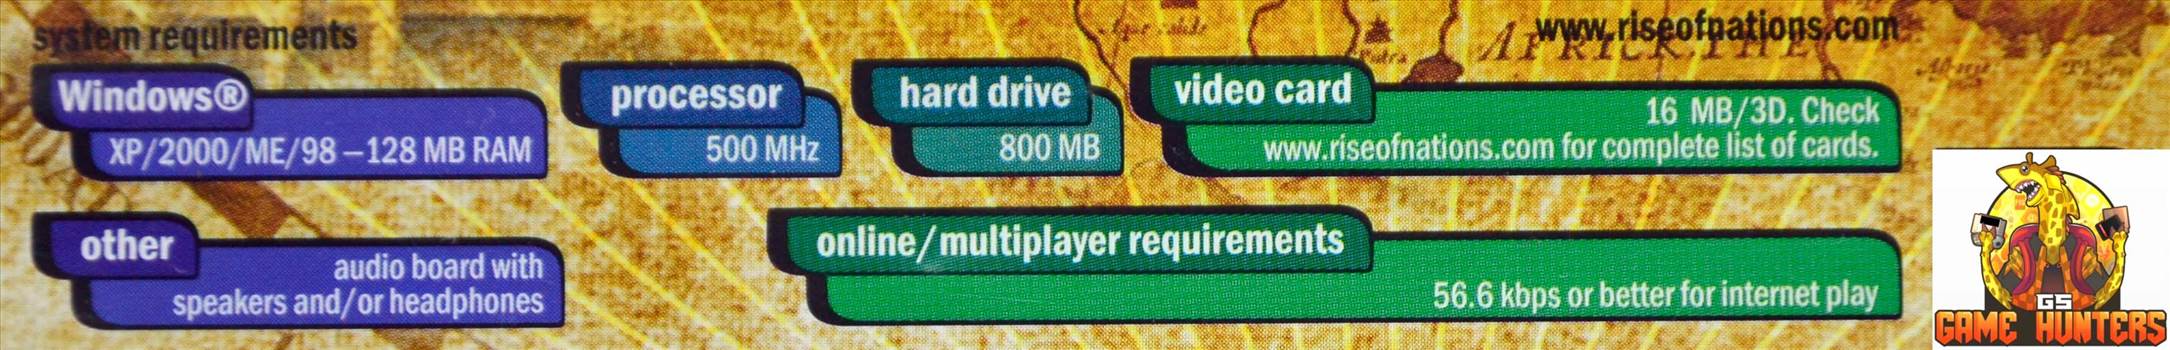 Rise of Nations System Requirements.jpg by GSGAMEHUNTERS